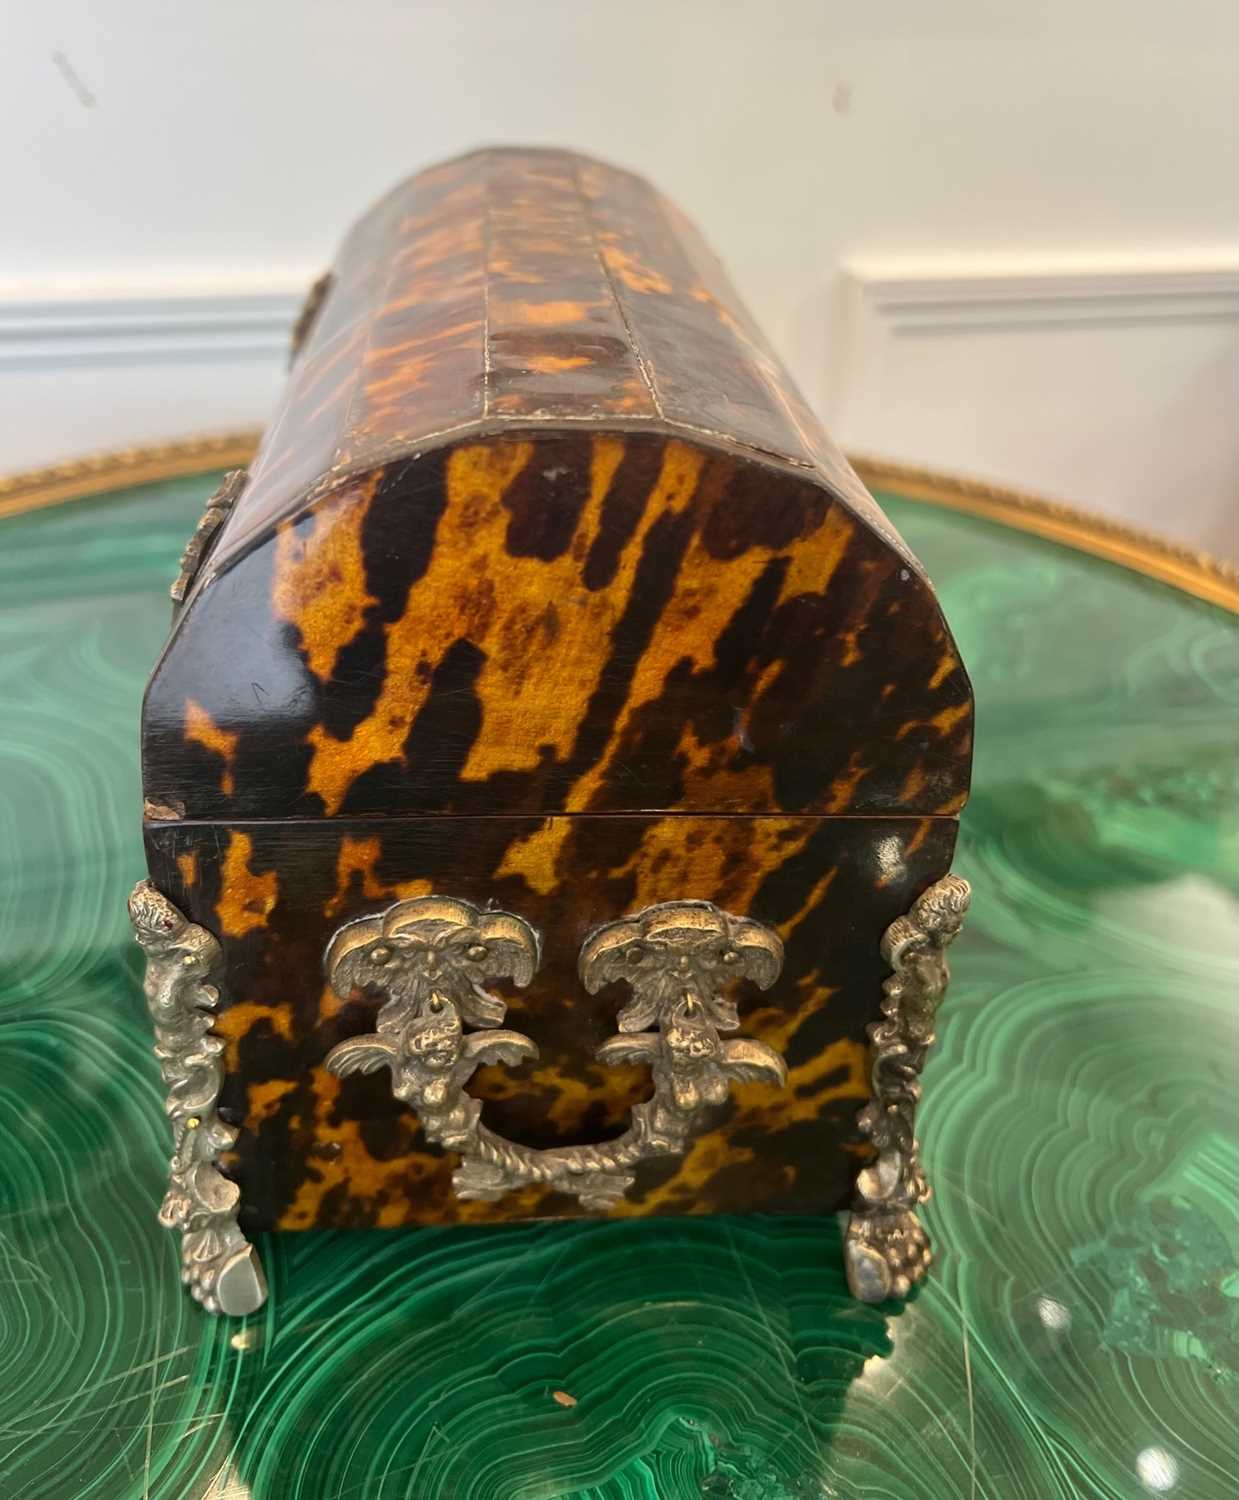 AN 18TH CENTURY DUTCH COLONIAL TORTOISESHELL AND SILVERED METAL MOUNTED CASKET - Image 12 of 14